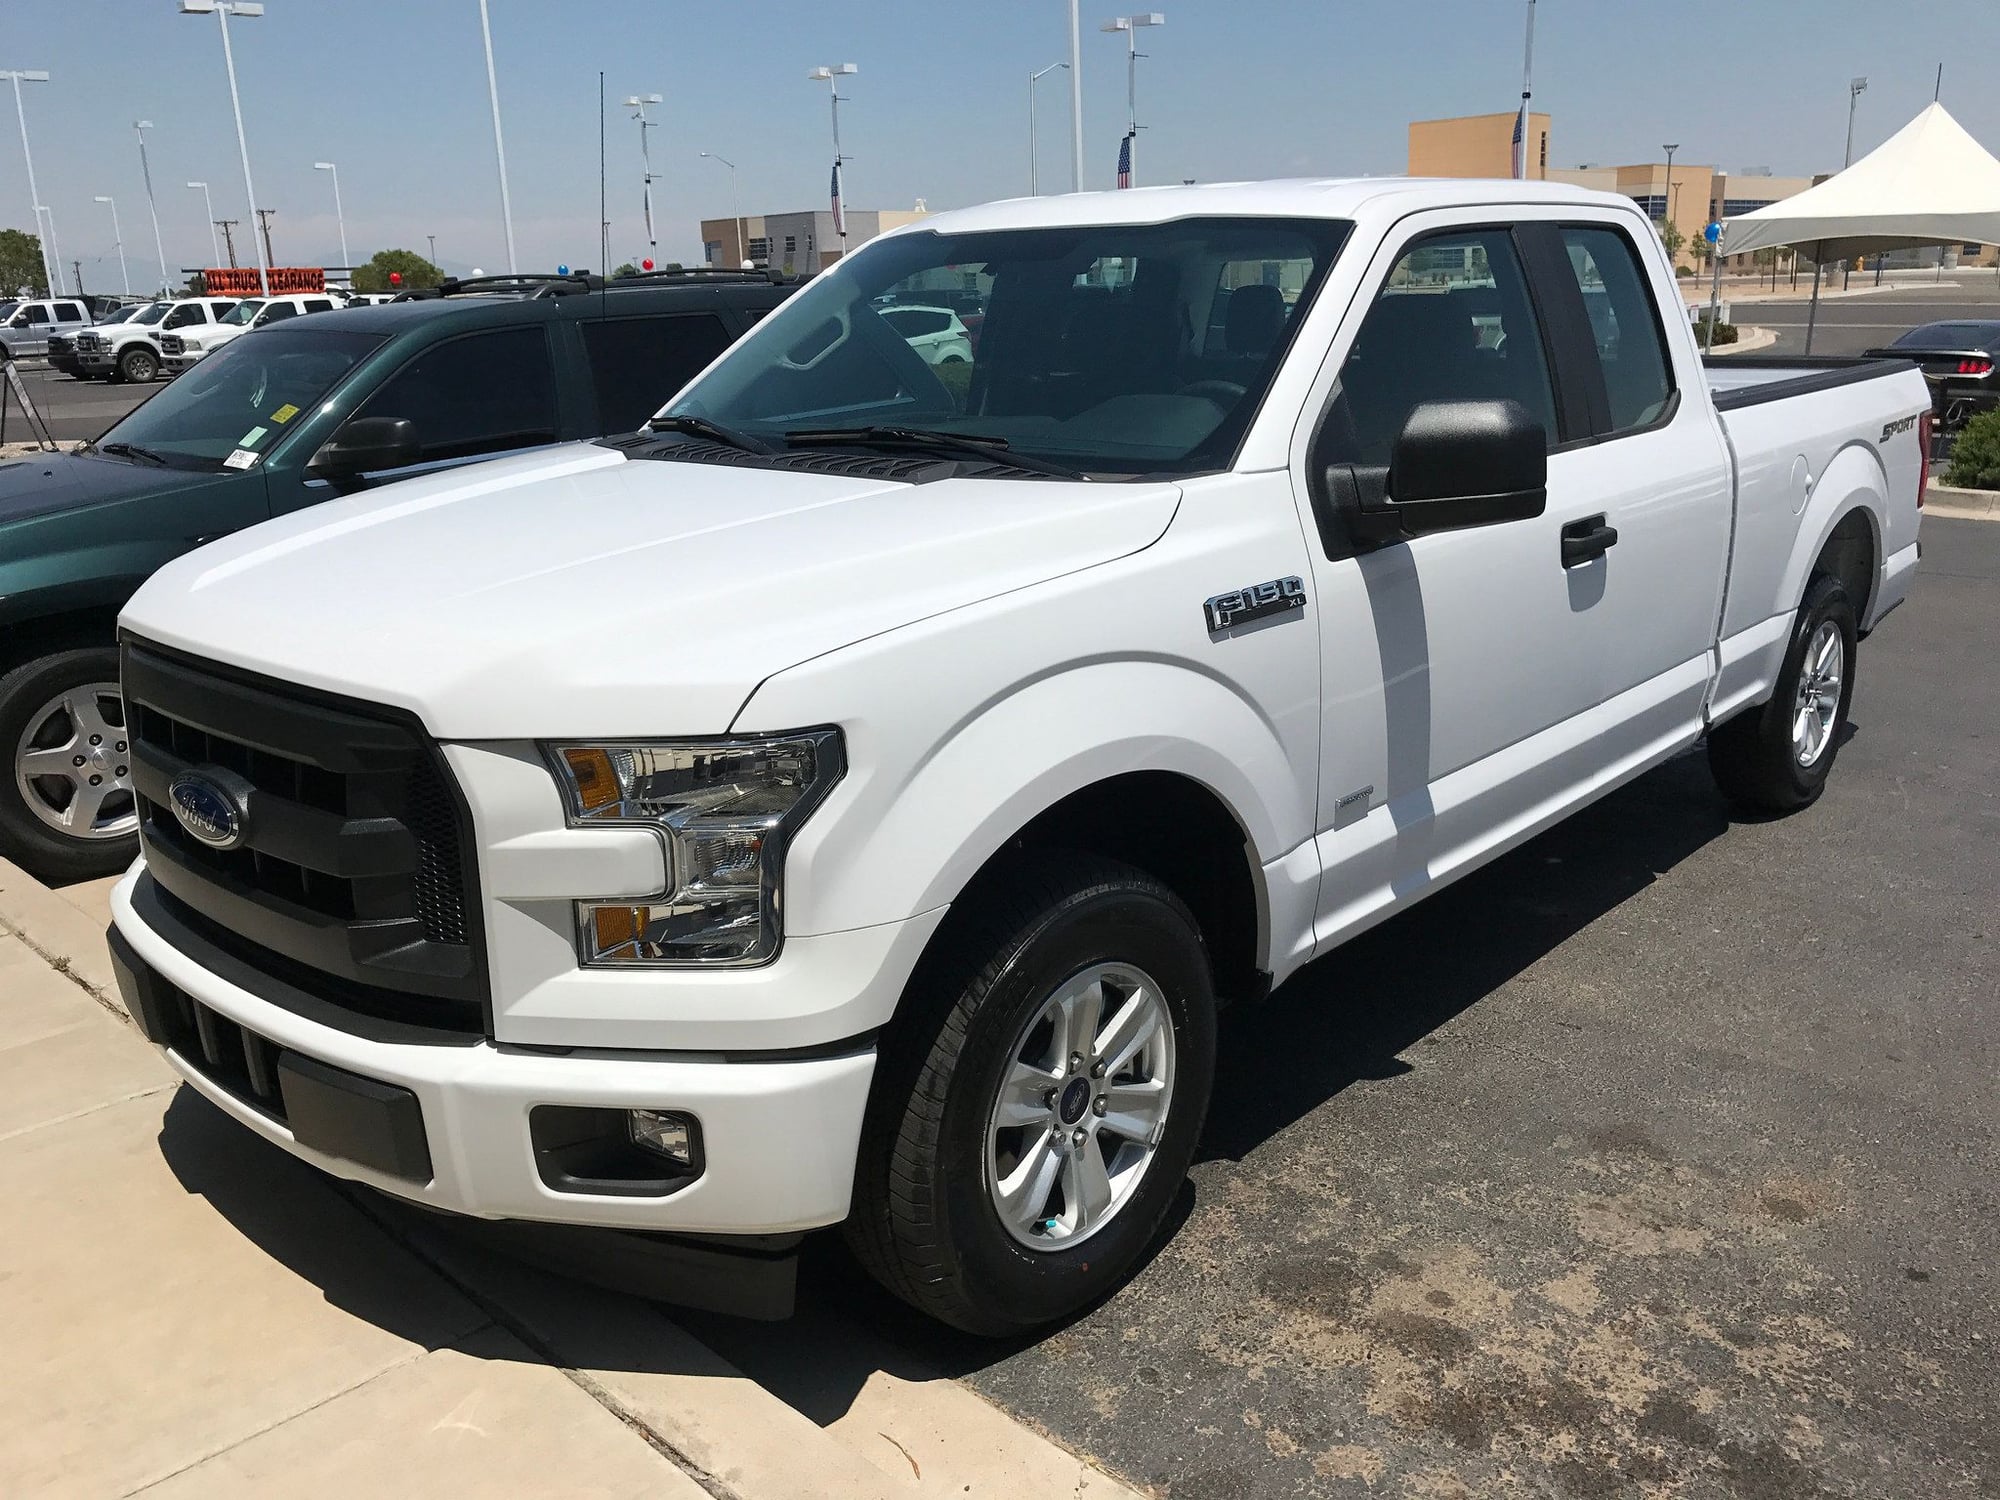 2017 F150 ecoboost - Ford F150 Forum - Community of Ford Truck Fans 2017 Ford F 150 2.7 Ecoboost Problems